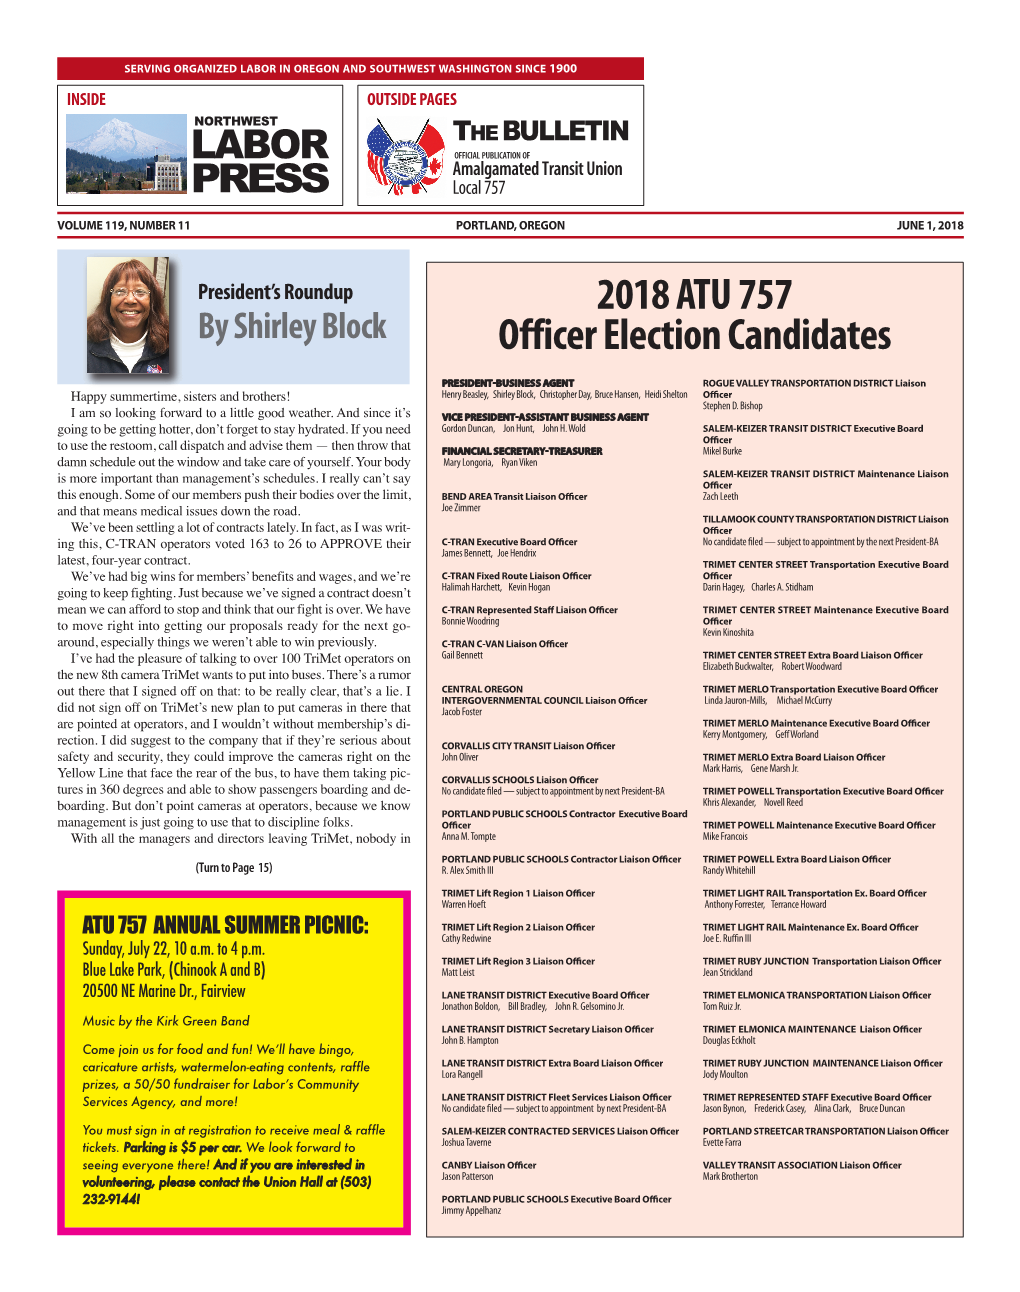 2018 ATU 757 Officer Election Candidates